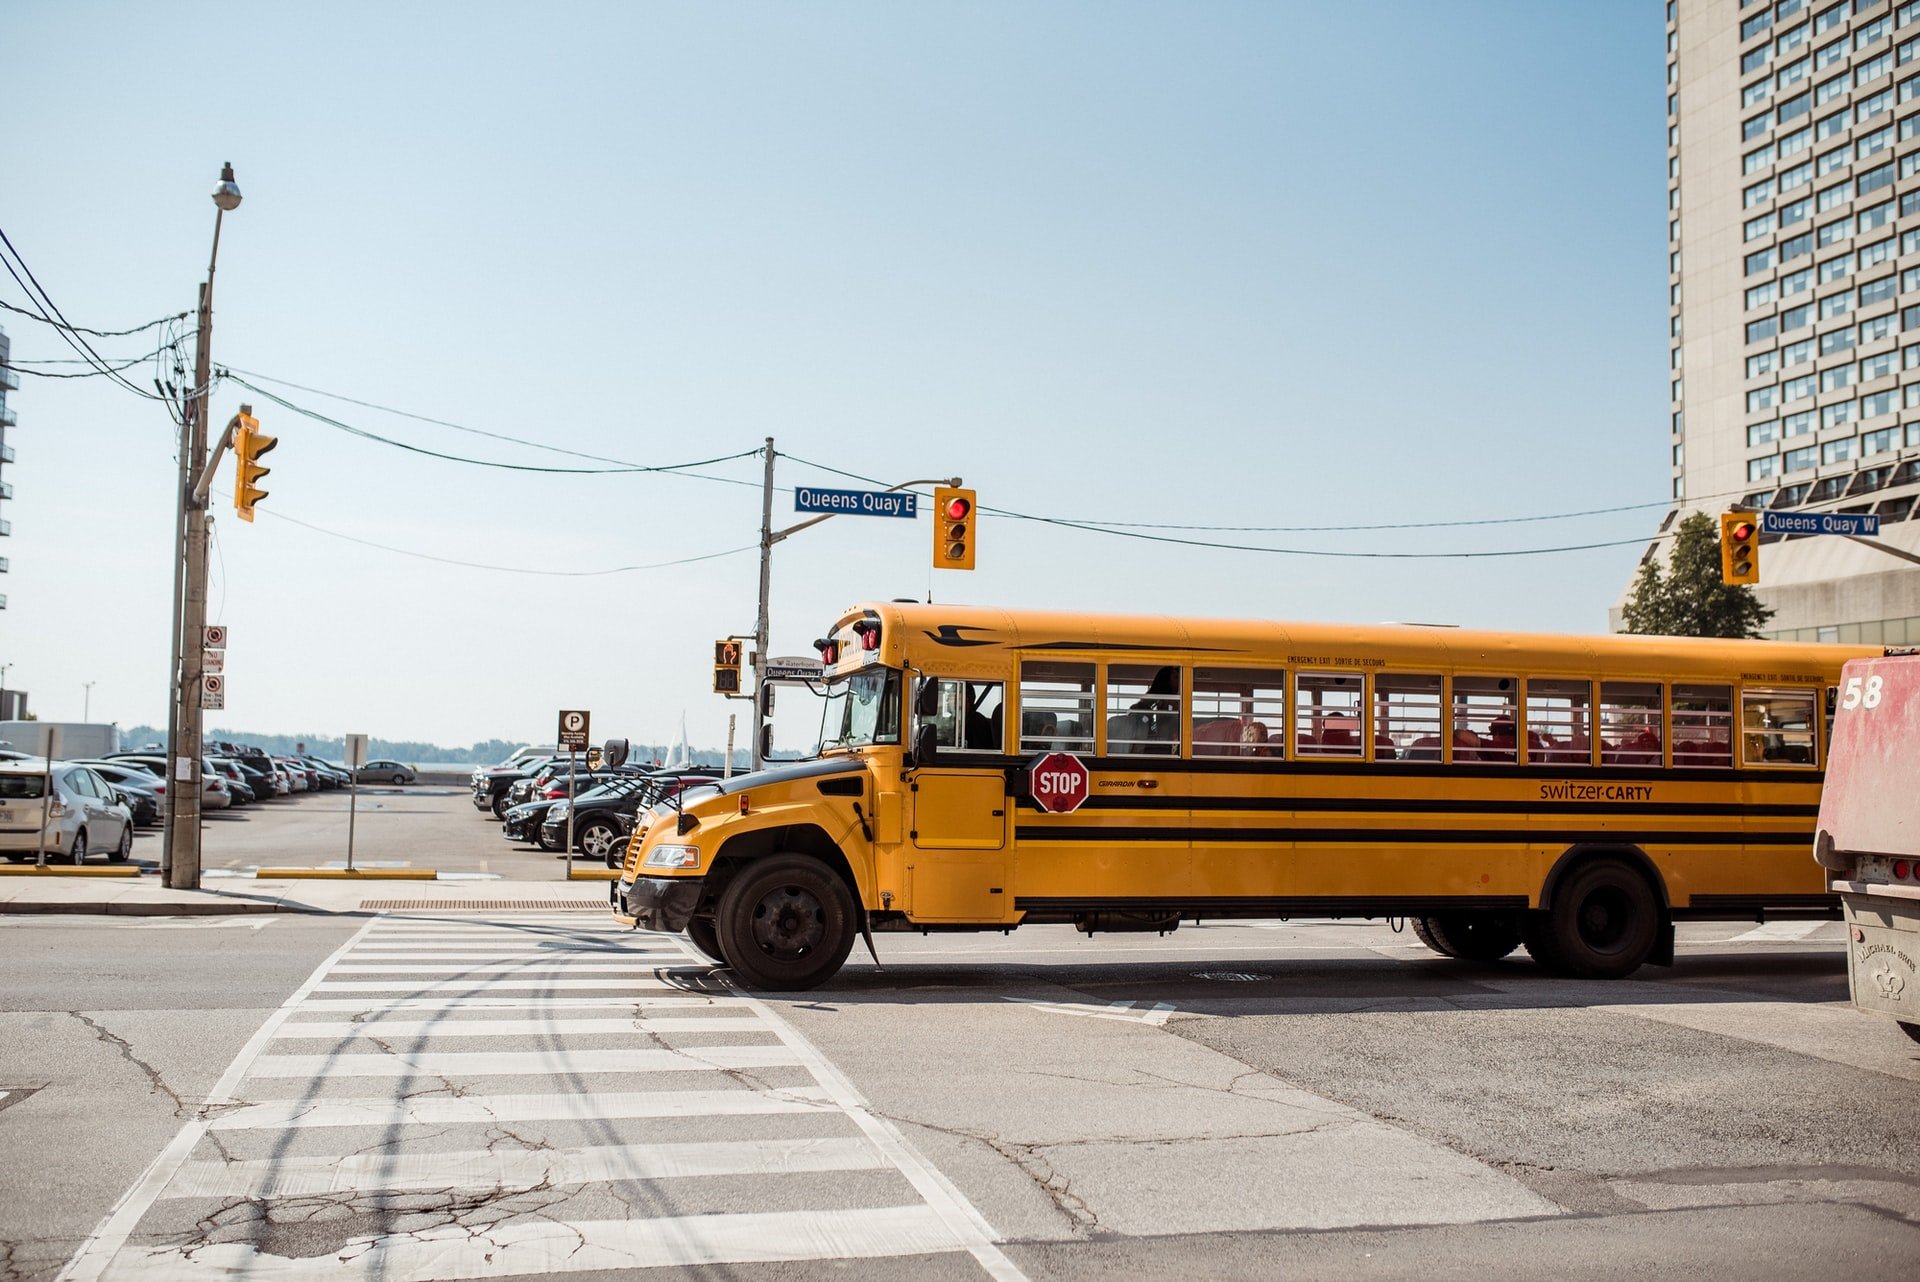 The school bus was headed in the wrong direction | Source: Unsplash